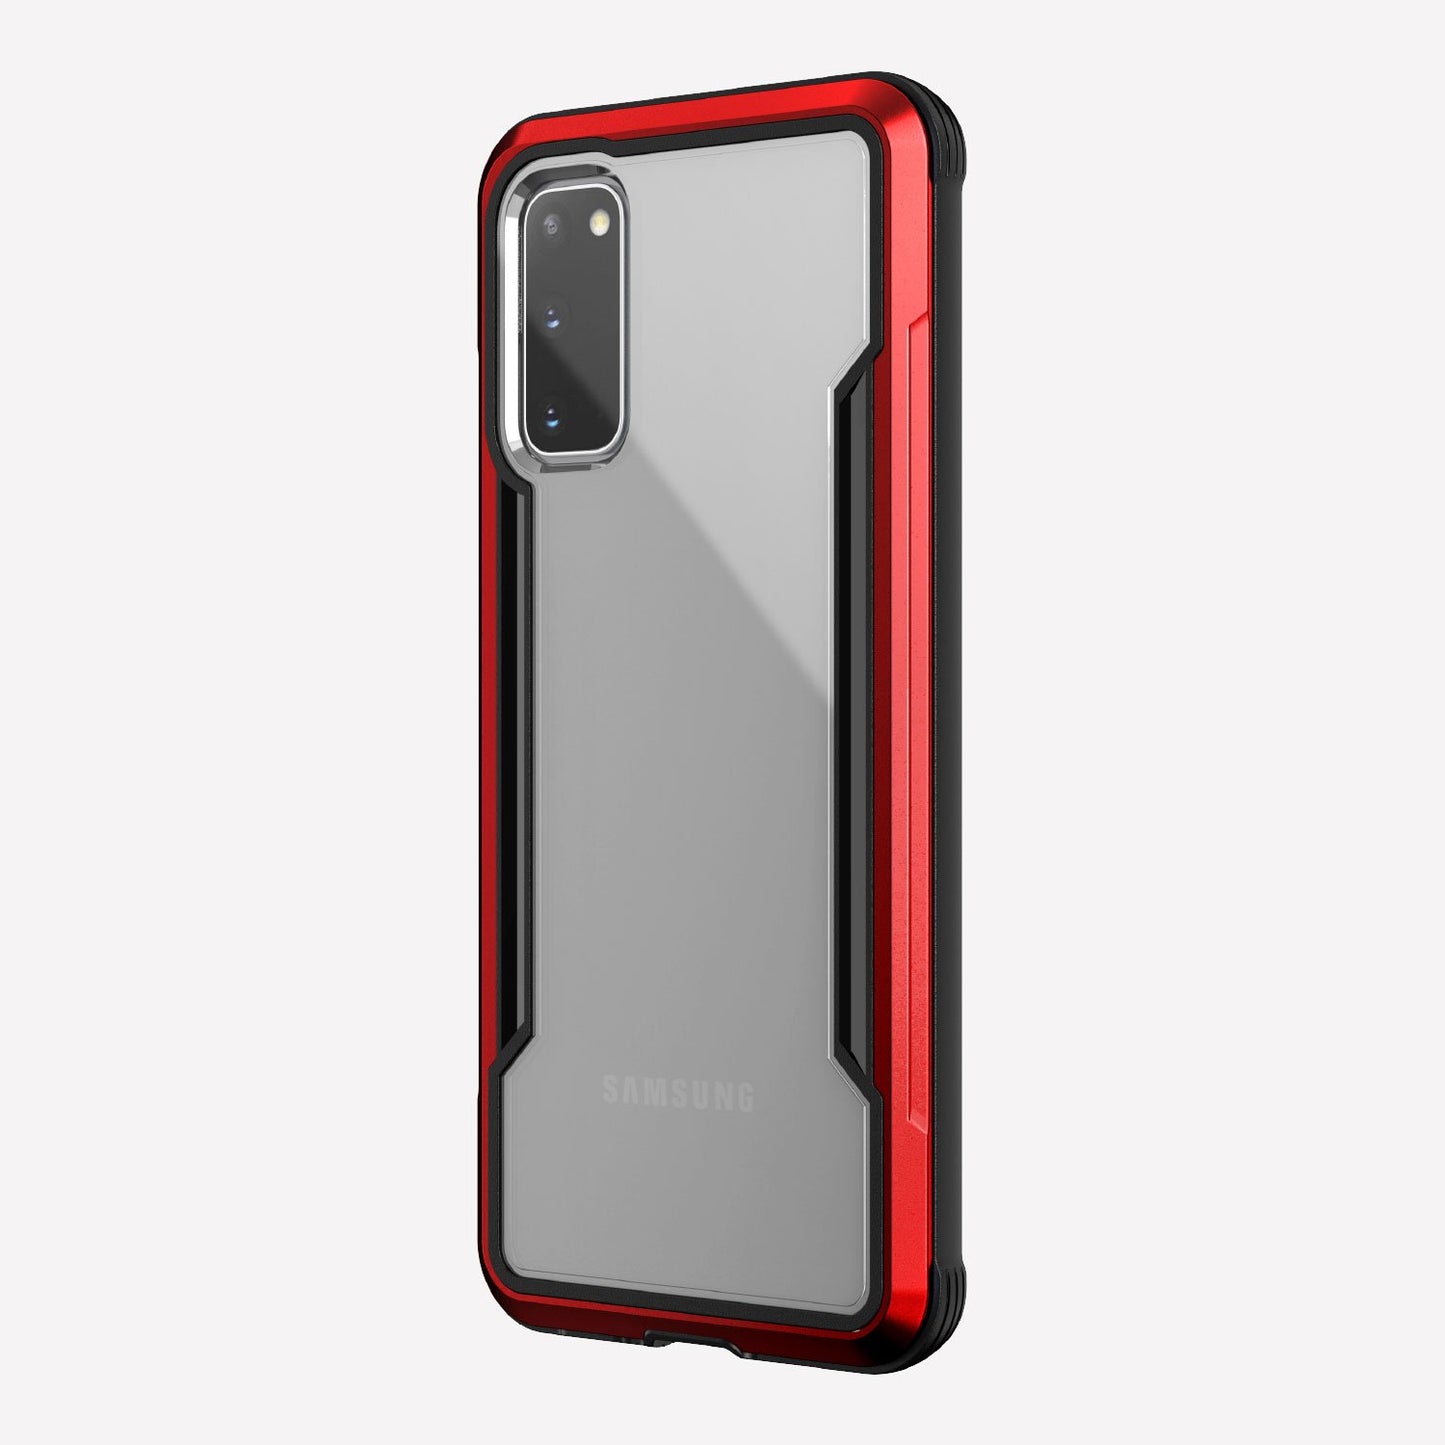 Defense shield red with Galaxy S20 in it showing the back view with the red color on the back panel and that it's transparent